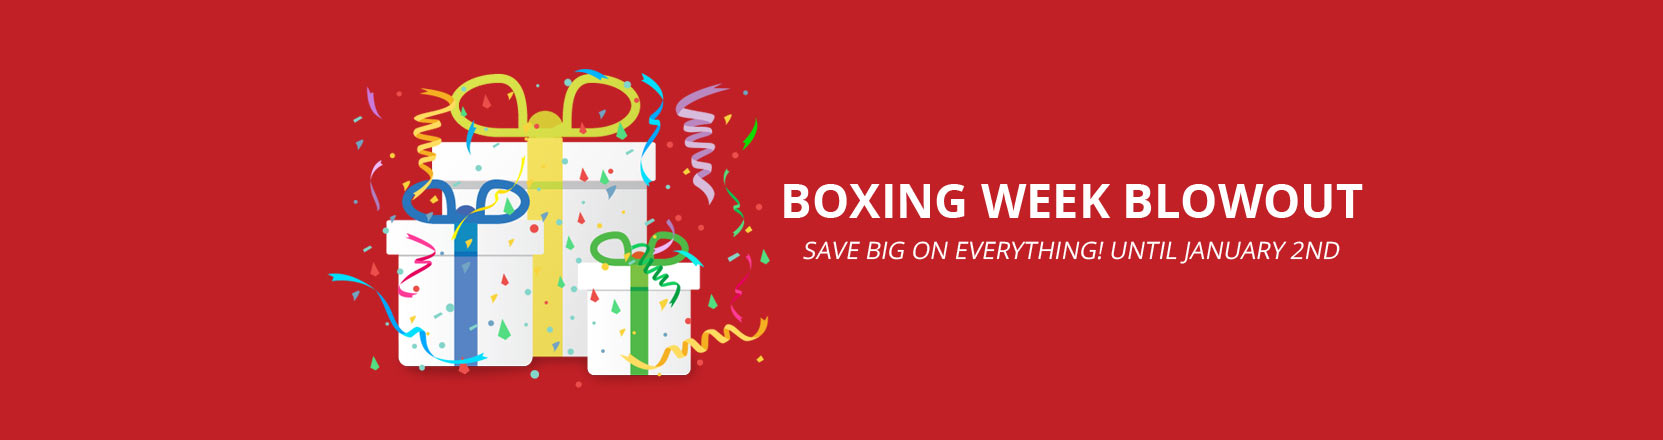 BOXING WEEK BLOWOUT - SAVE BIG ON EVERYTHING! Until January 2.